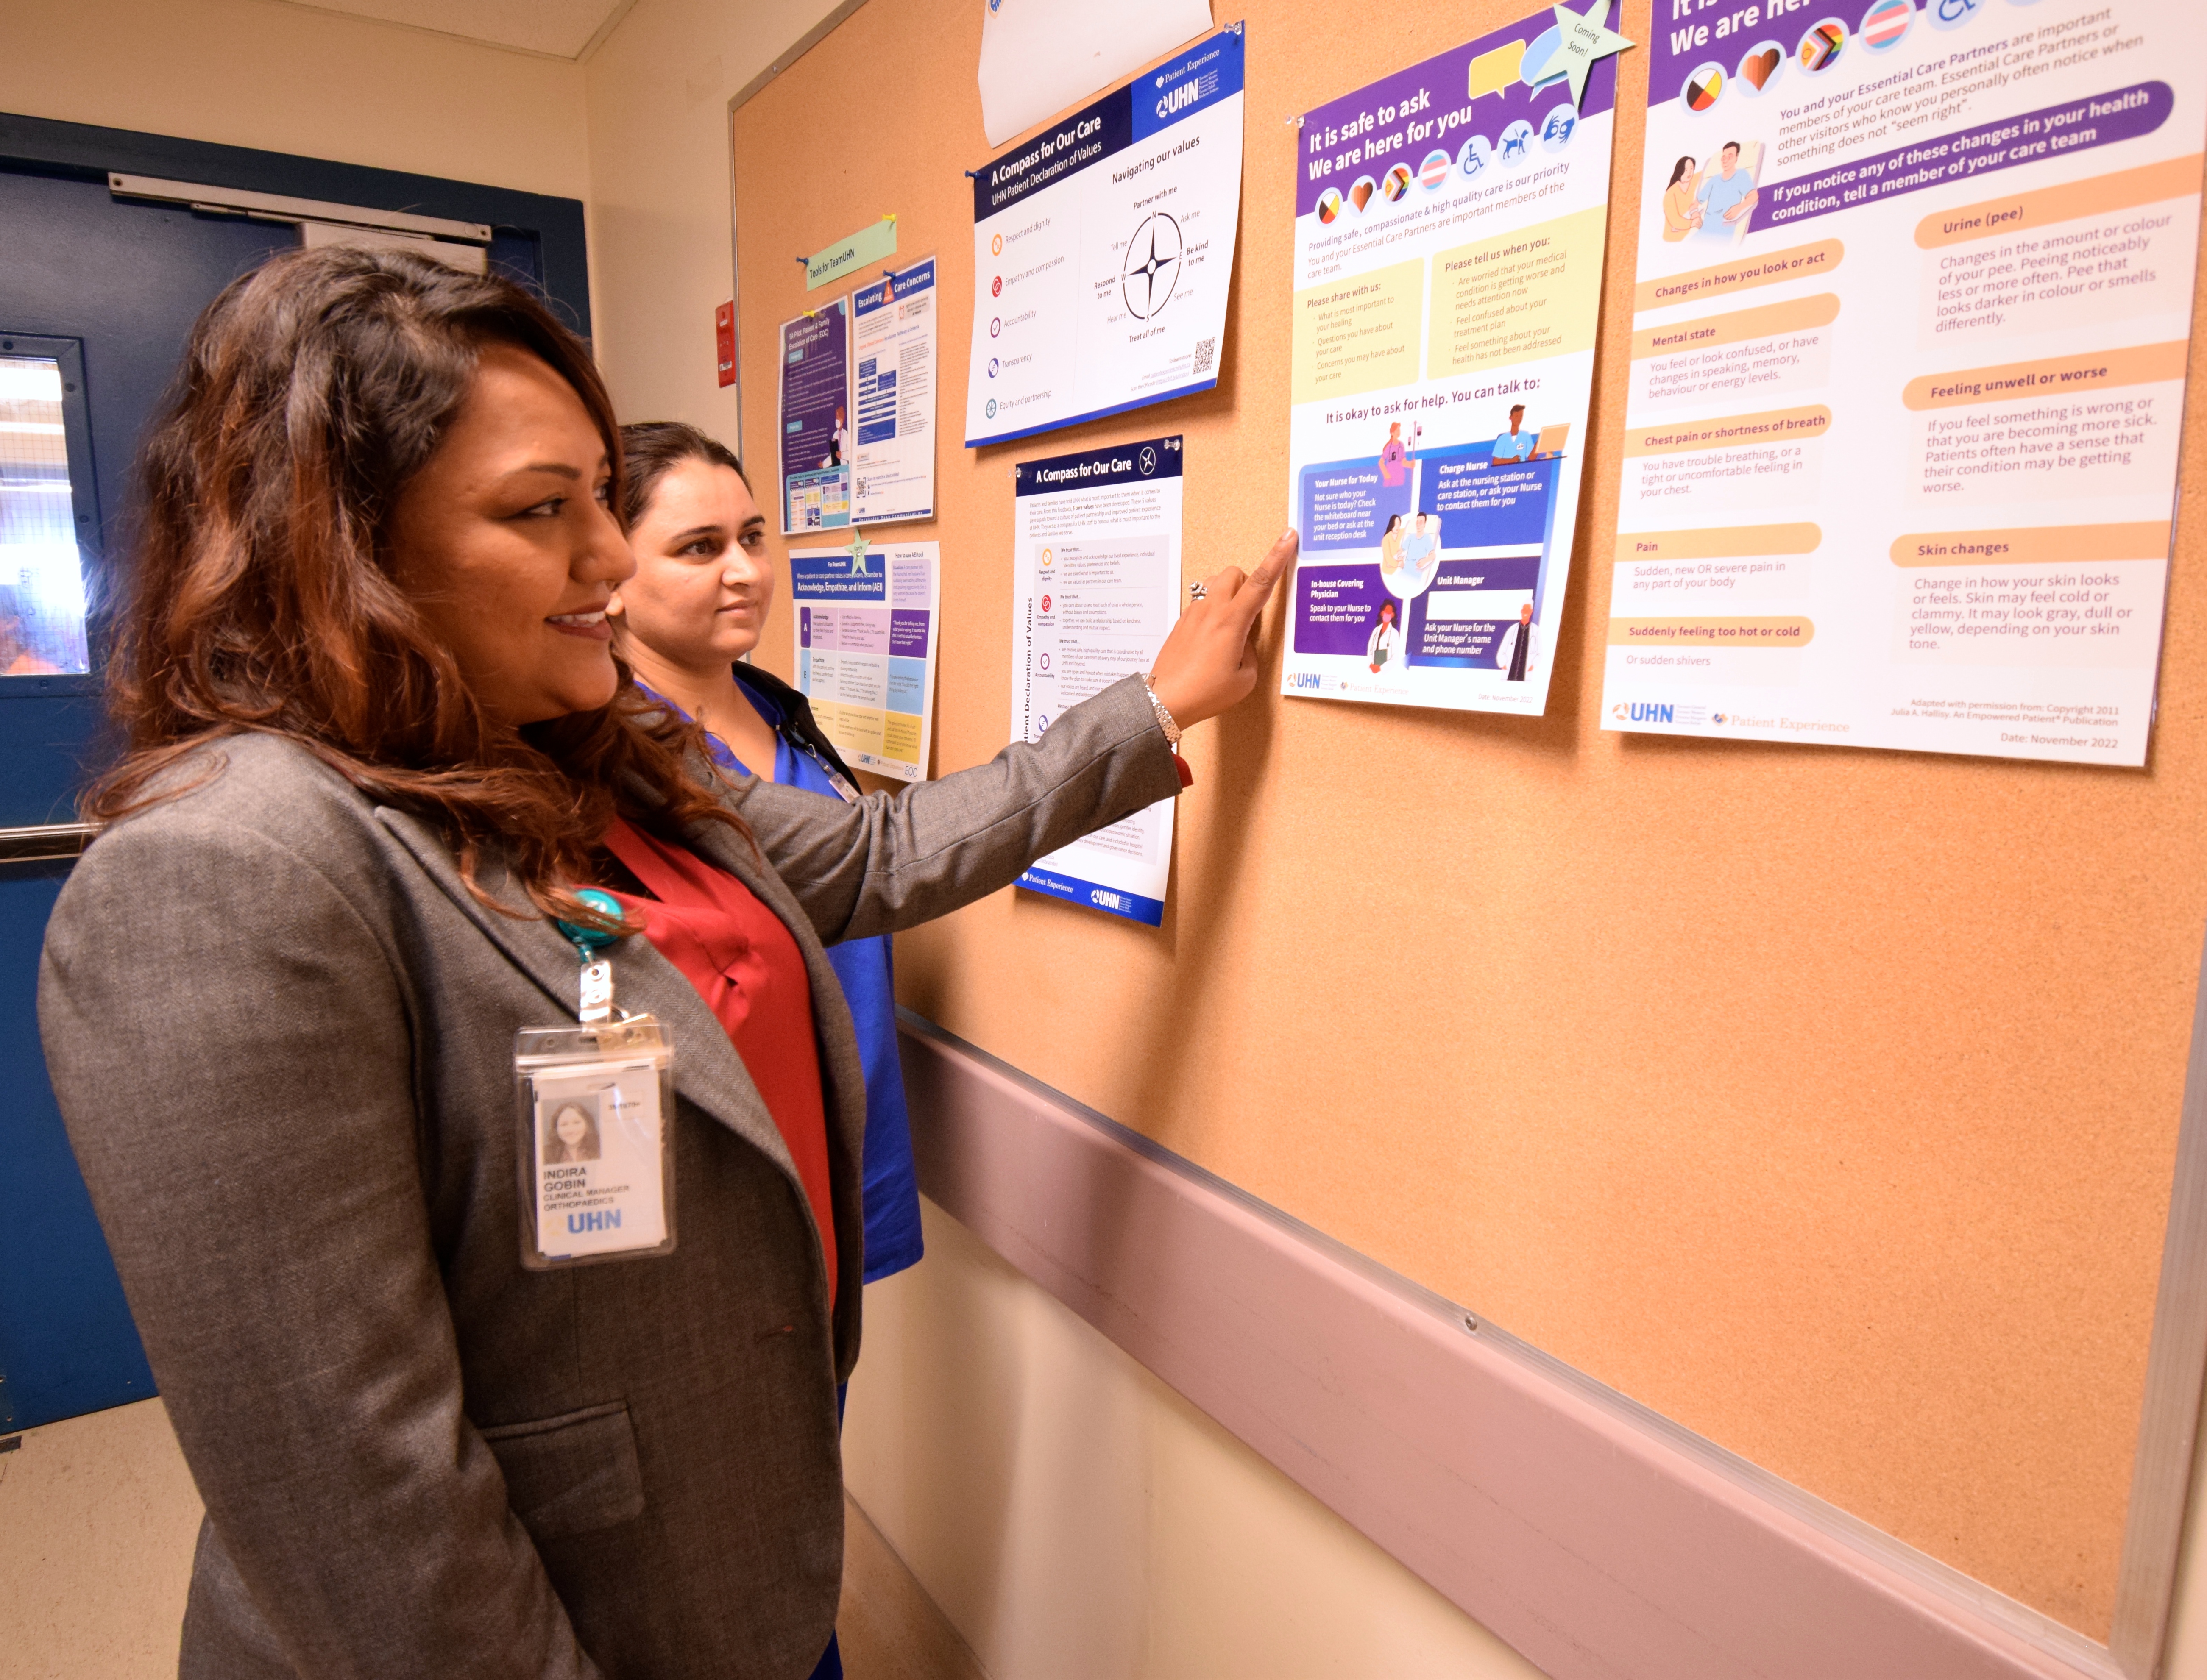 UHN staff looking at poster 